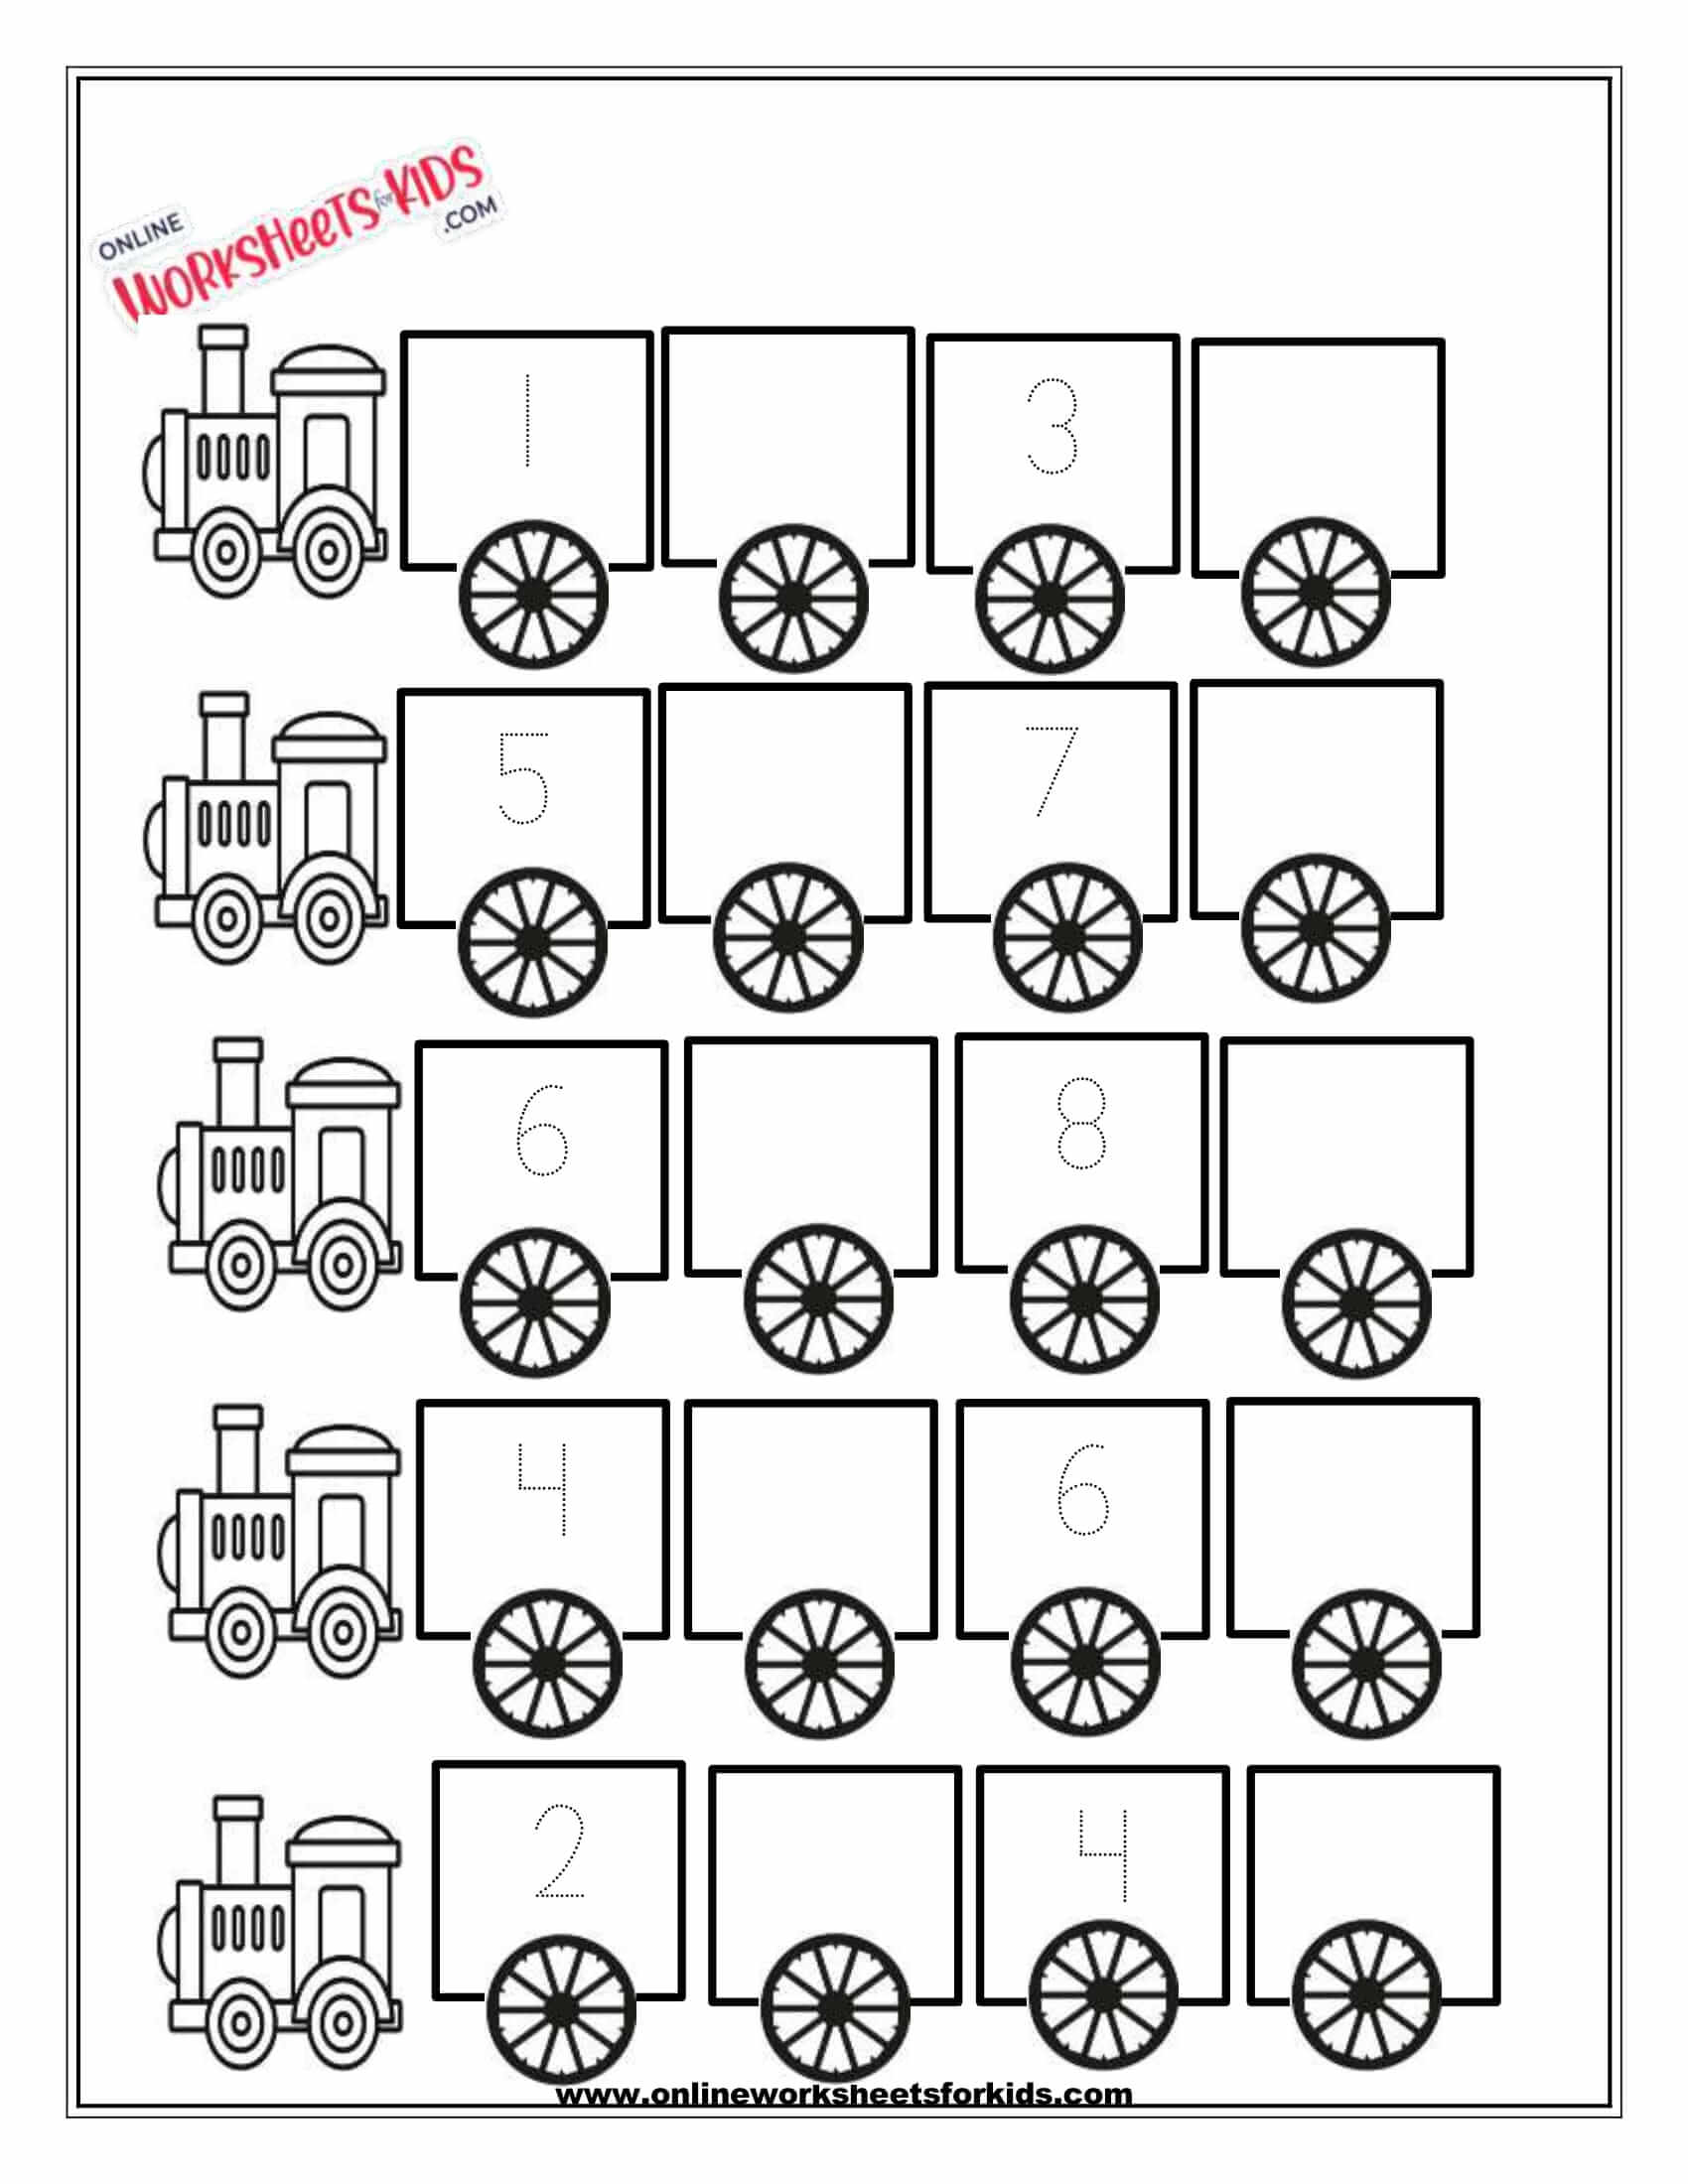 numbers-1-to-10-worksheets-worksheets-for-kids